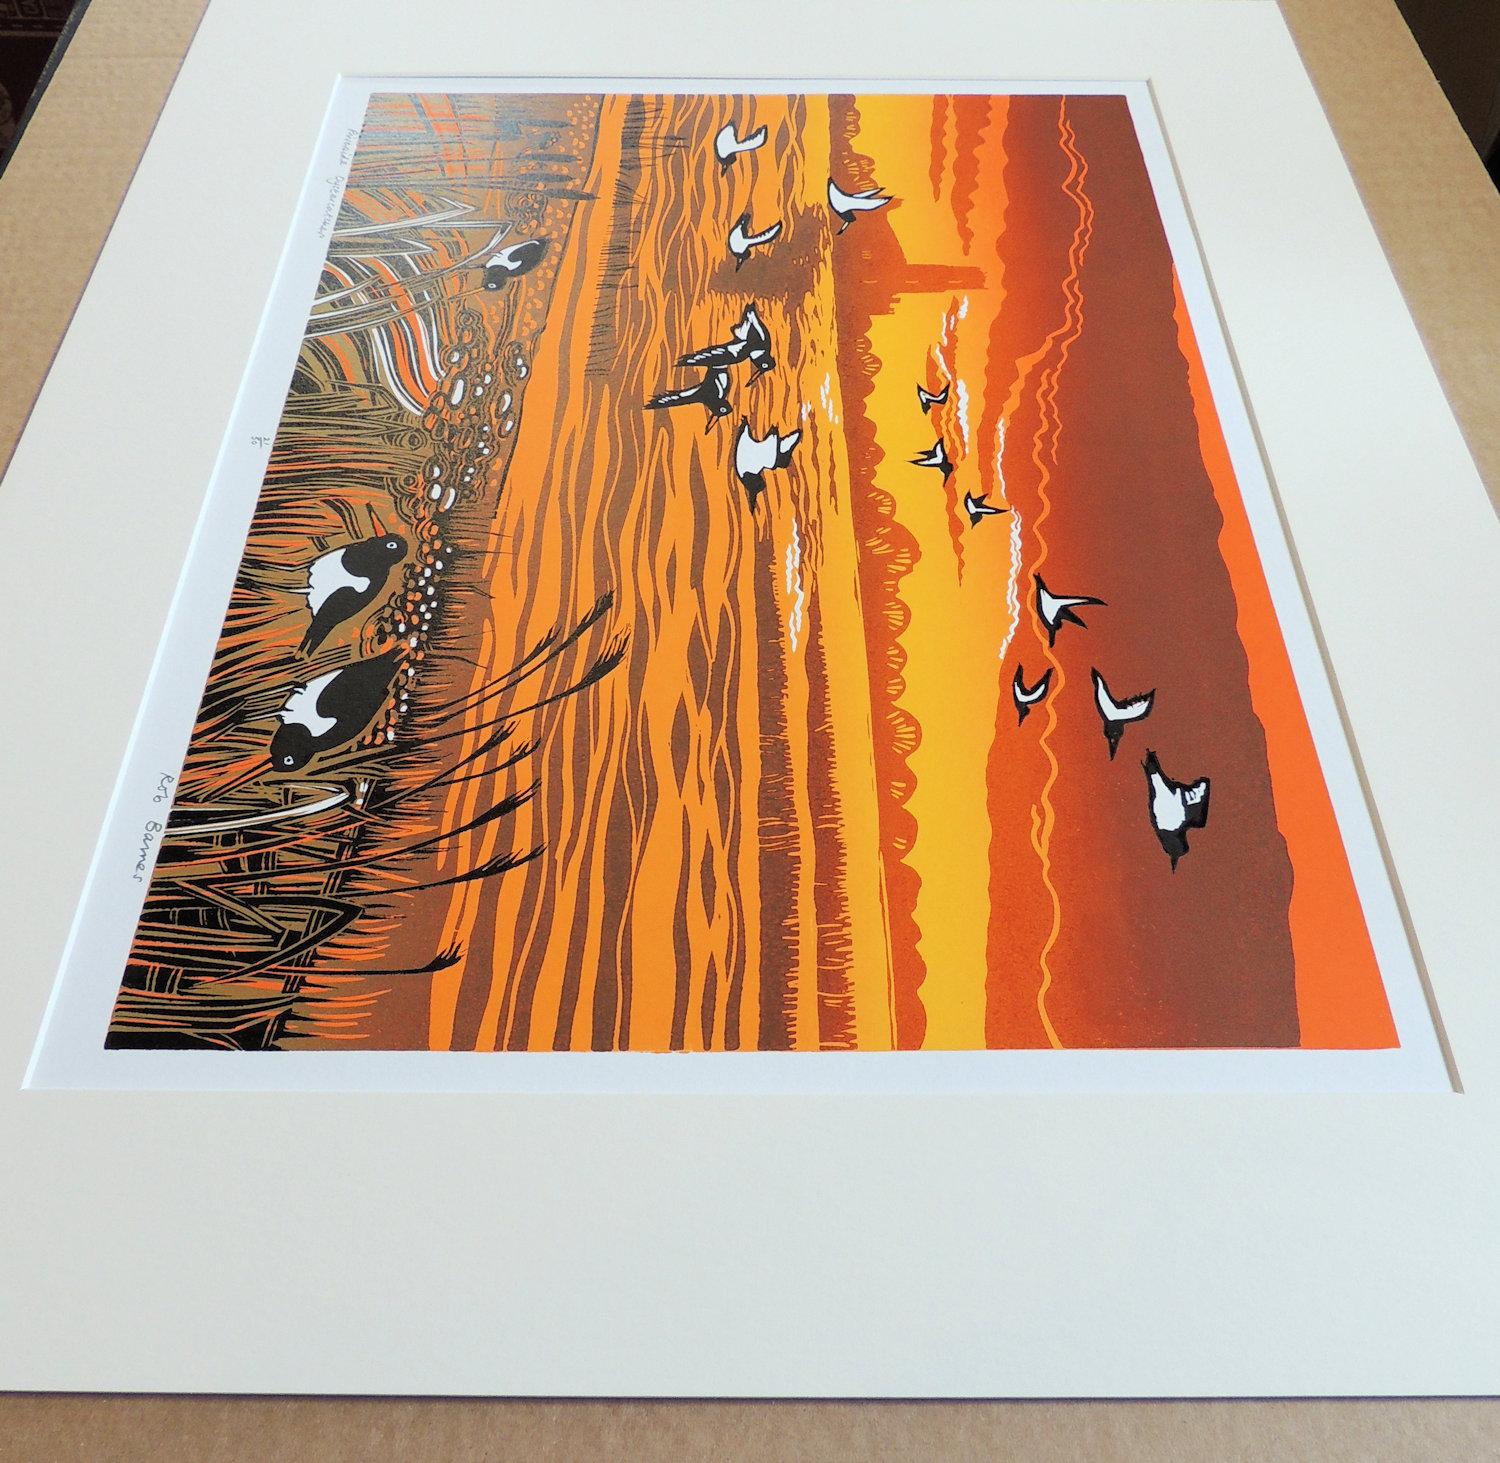 Rob Barnes
Riverside Oystercatchers
Limited Edition Linocut Print
Edition of 50
Image Size H 44cm x W 33cm
Sheet Size H 49cm x W 61cm
Sold Unframed mounted in Antique White mountboard
Free Shipping
Please note that in situ images are purely an